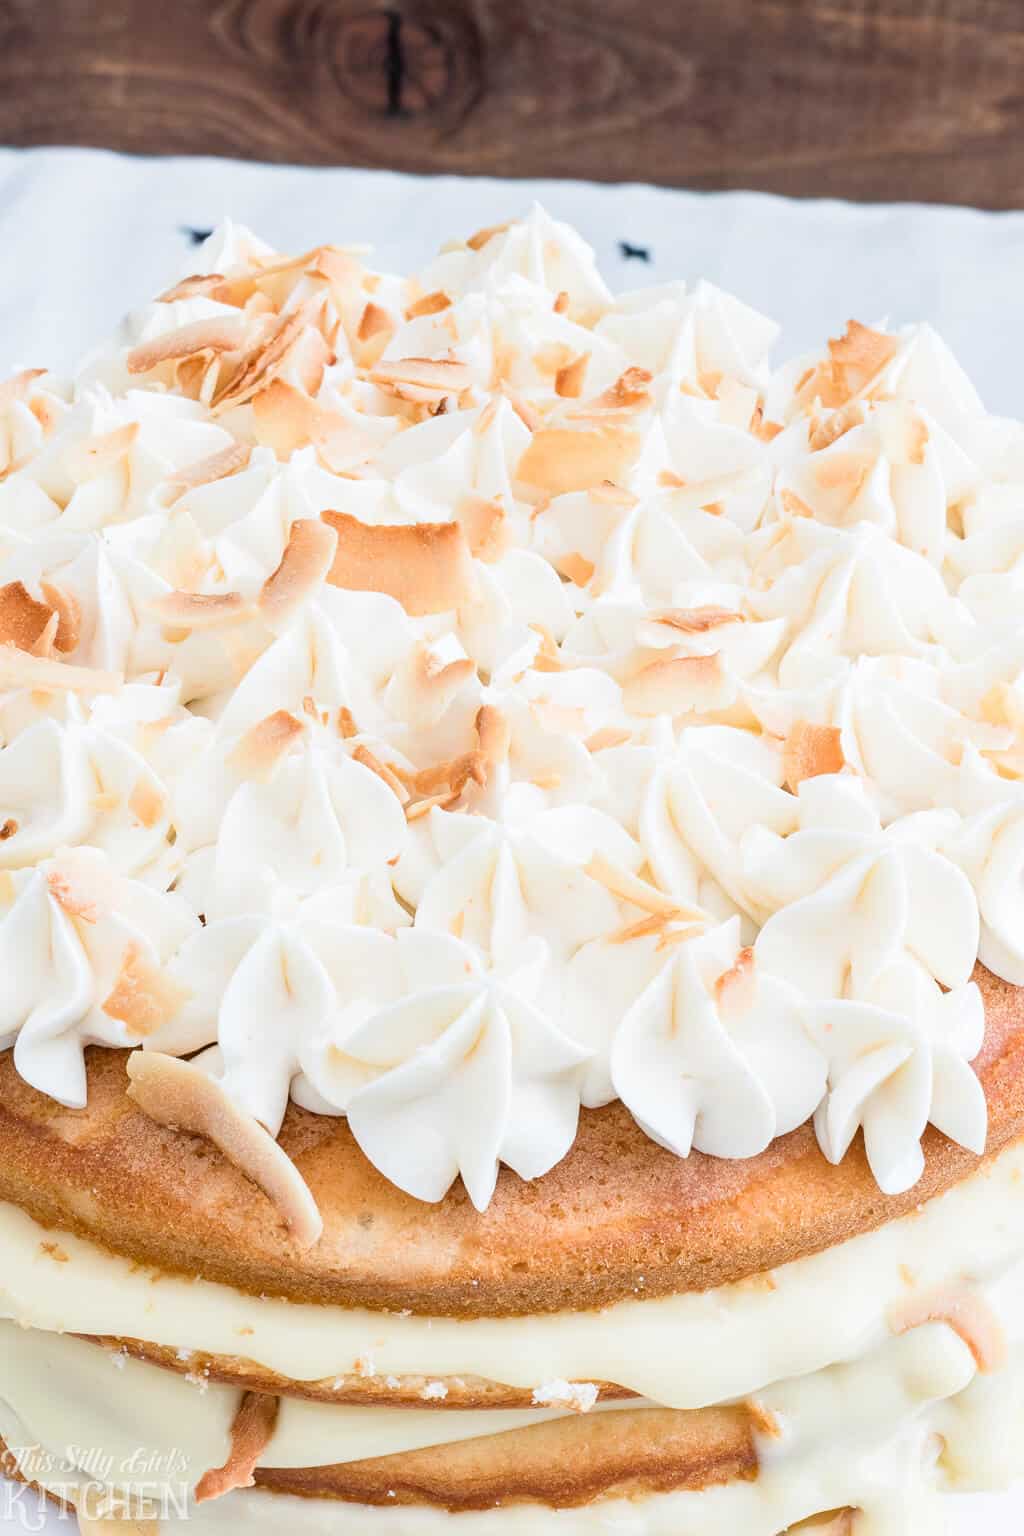 Naked Coconut Cake, layers of white cake, coconut pudding and coconut frosting, all topped with toasted coconut and caramel sauce! #Recipe from ThisSillyGirlsKitchen.com #coconut #coconutcake #cake #nakedcake